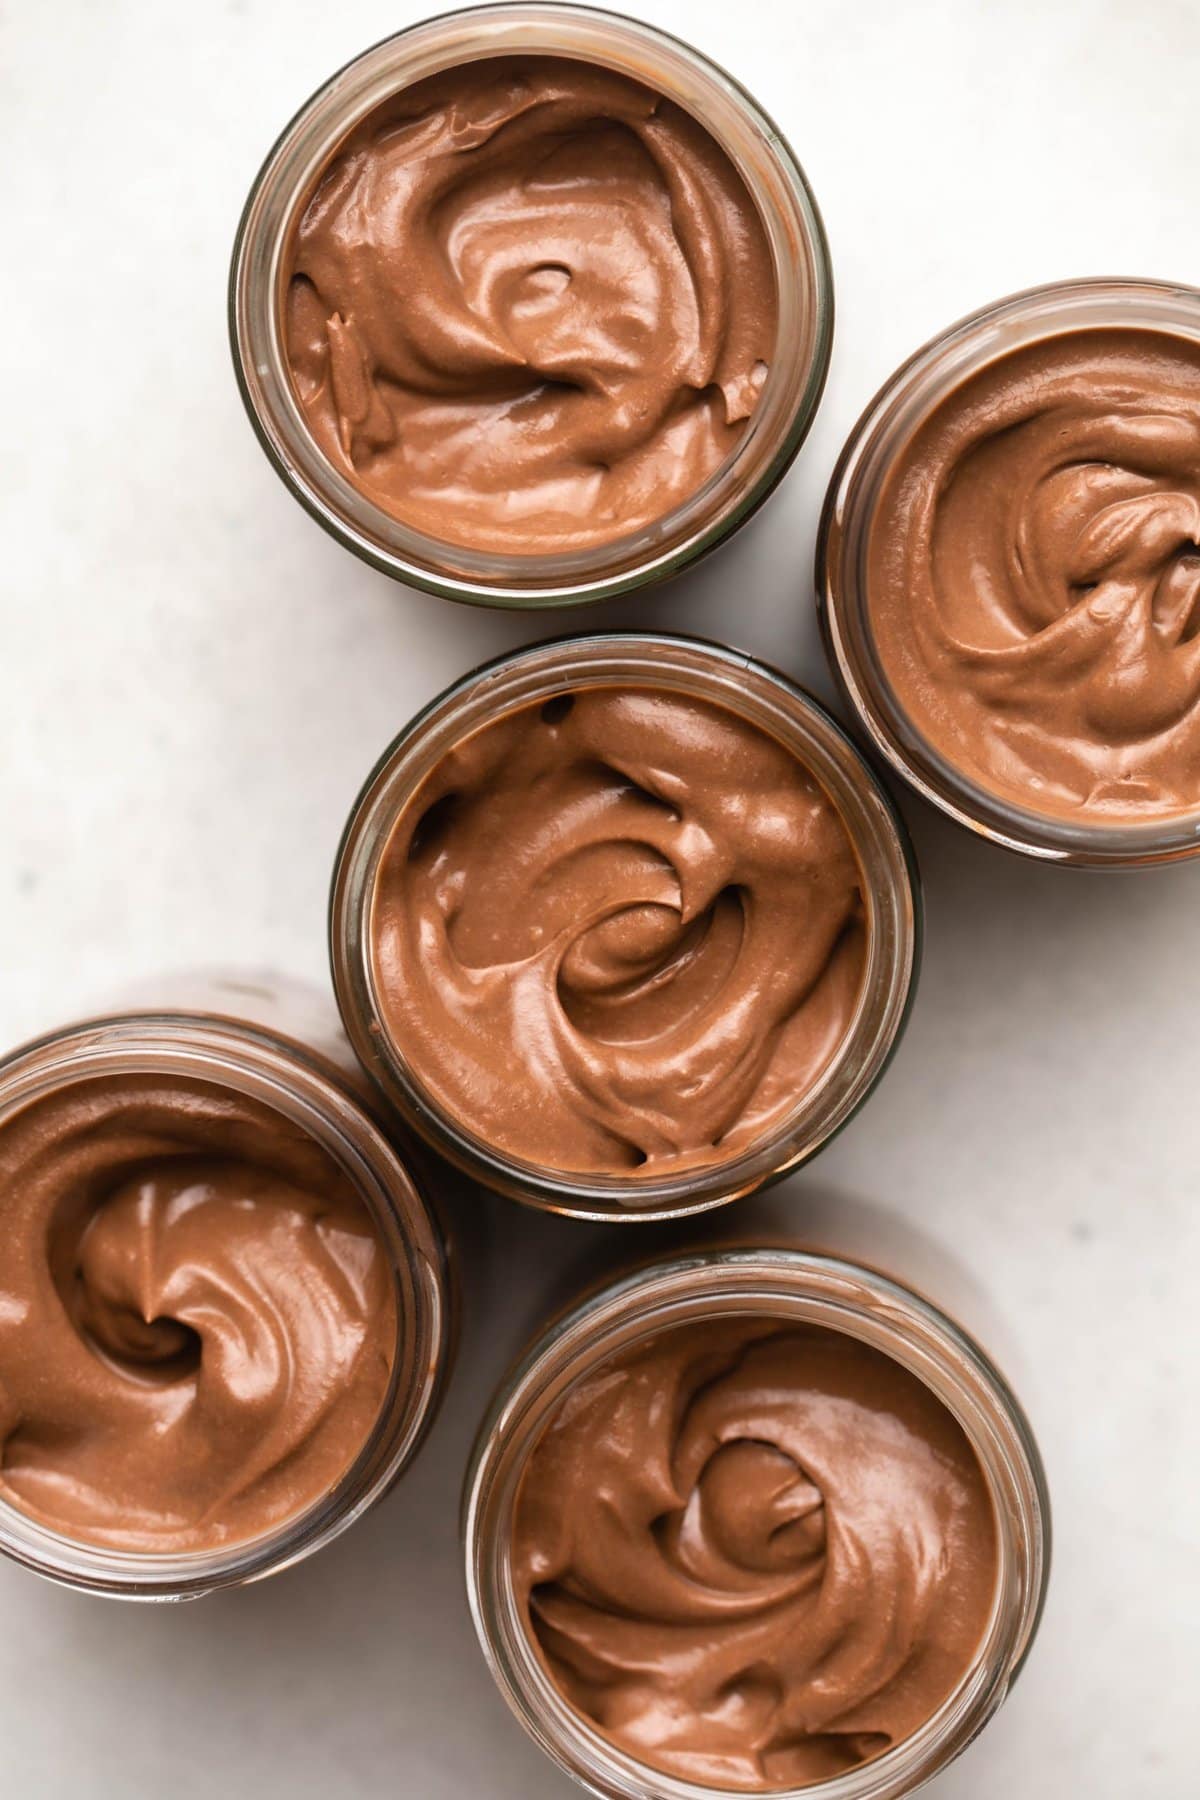 5 jars of chocolate pudding swirled with a spoon on stone background